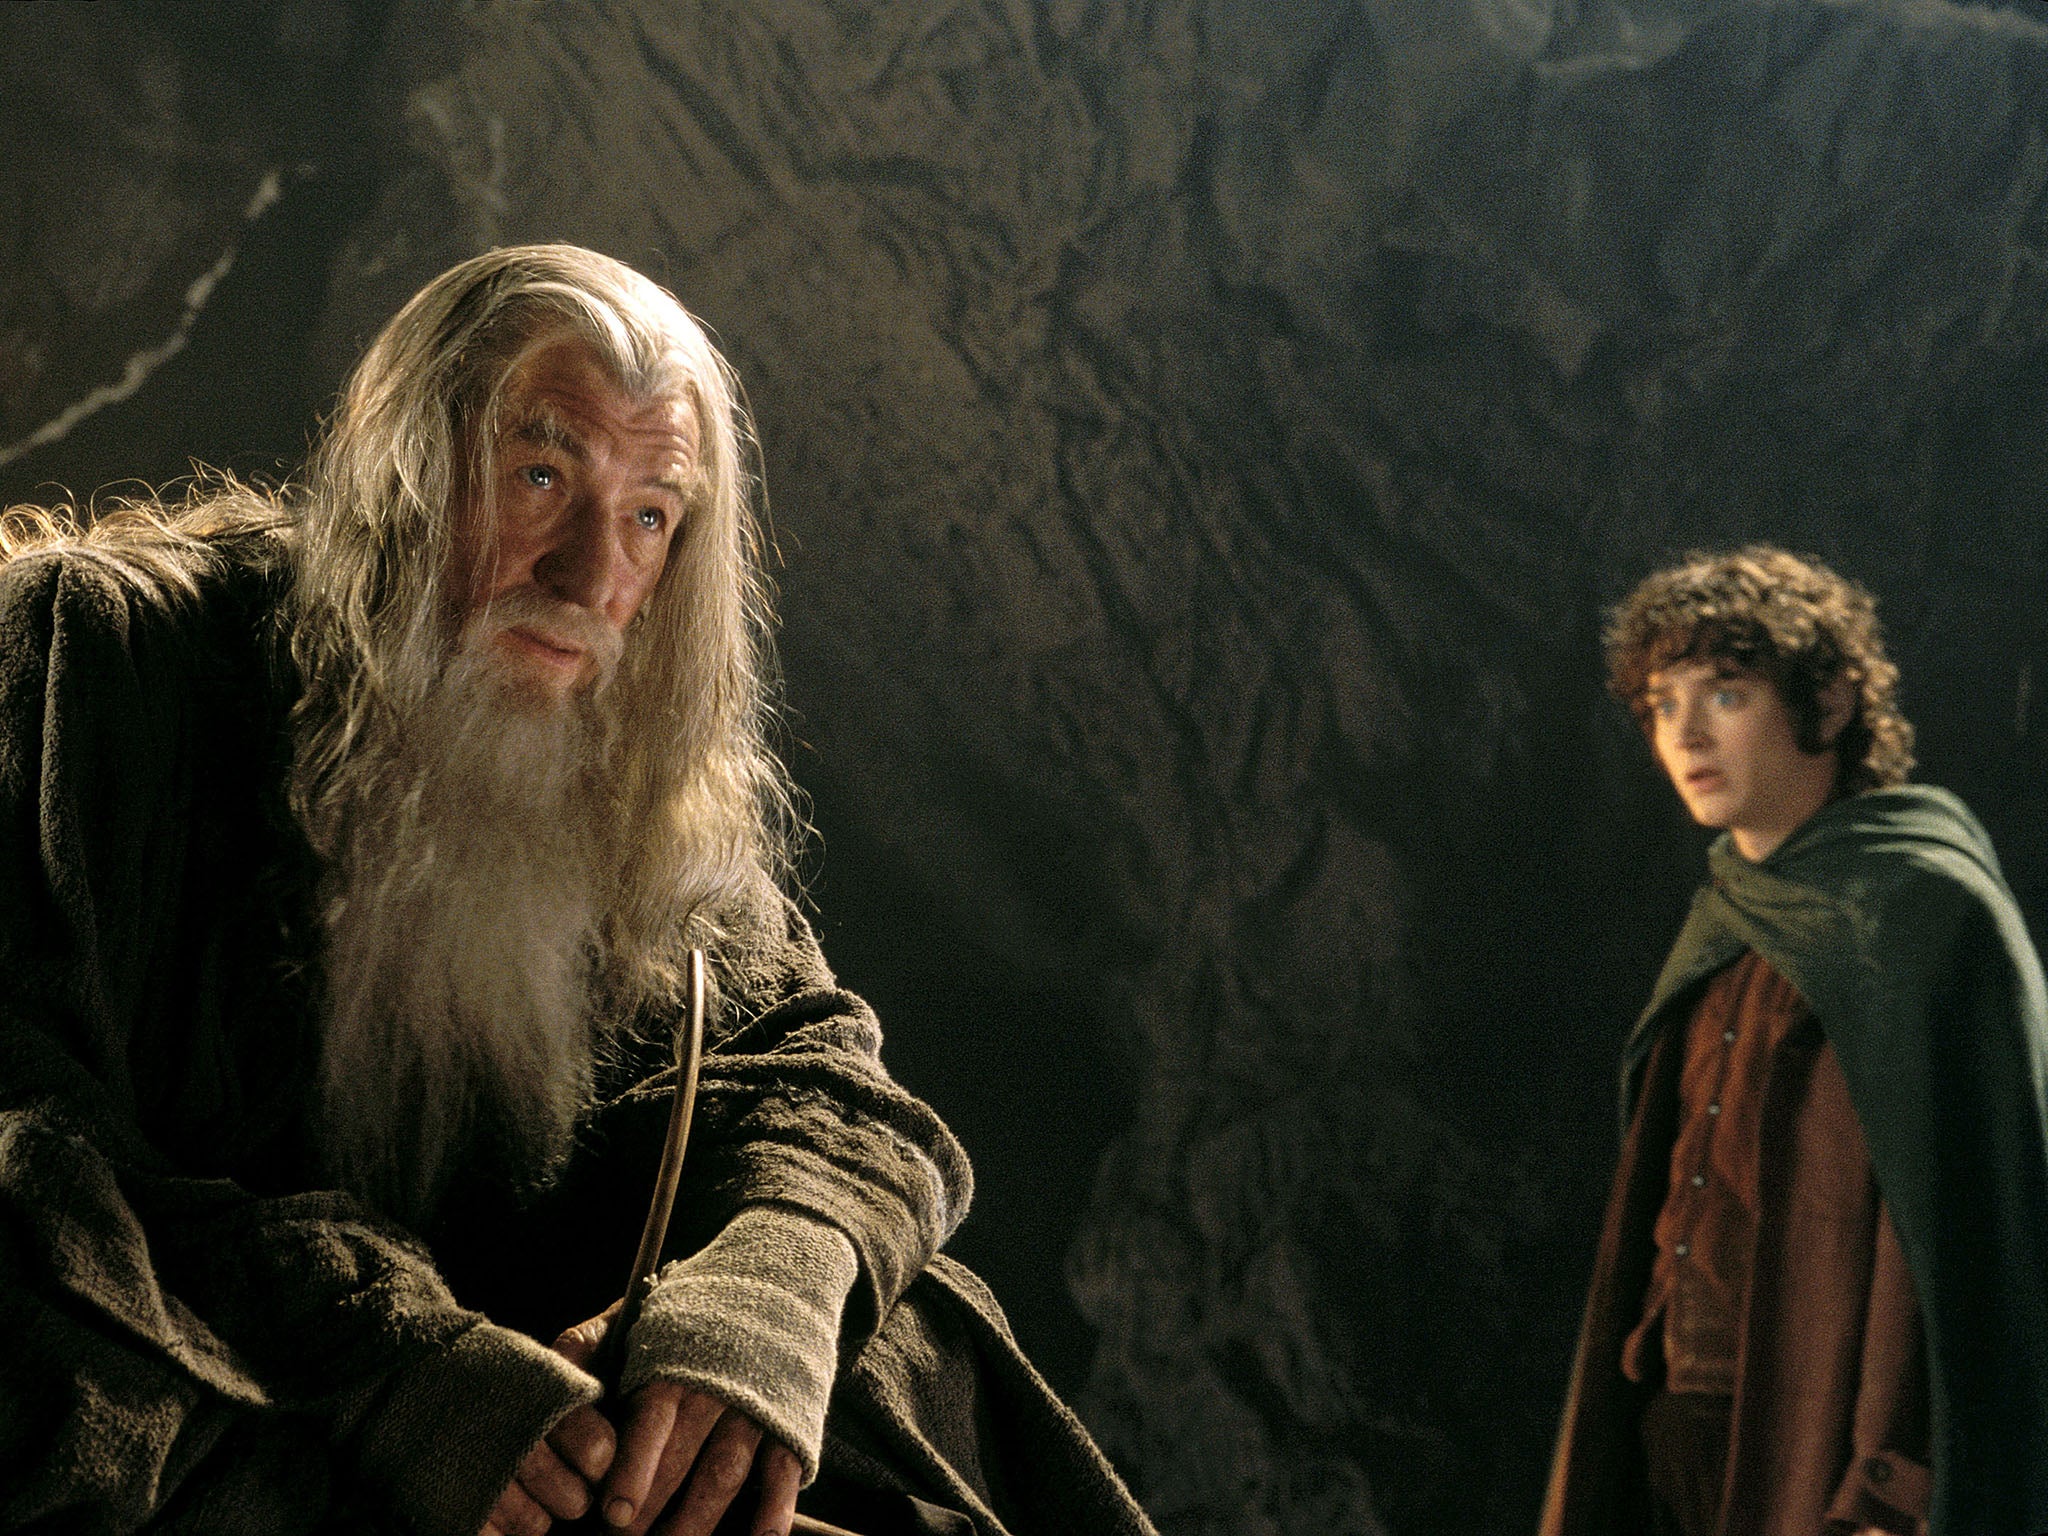 New Lord of the Rings Movies Announced From Original Trilogy